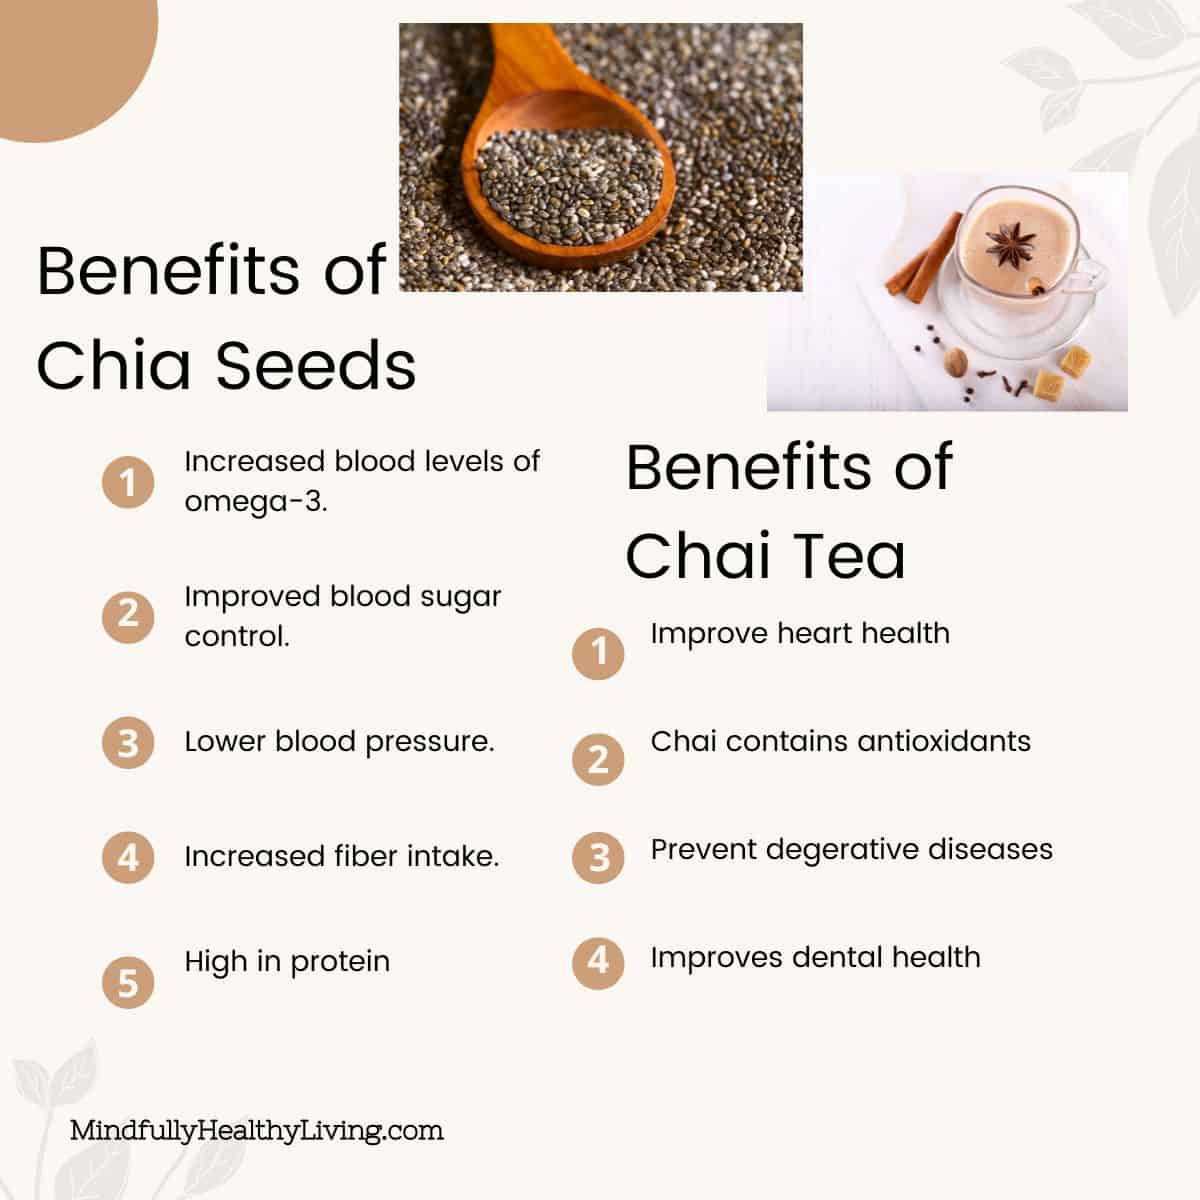 Infographic wth cream background and Black text. At the top left is a photo of chia seeds in a wooden spoon and at the top right is a photo of chai tea latte with spices around it. Under the chia photo is print that says Benefits of Chia Seeds and 5 orange circles with white numbers 1-5 in each itemizing the 5 ; listed benefits. 1. increased blood levels of omega-3. 2. Improved blood sugar control. 3. Lower Blood Pressure. 4. Increased fiber intake 5. High in protein. at the bottom of the page says MindfullyHealthLiving.com. Under the Chai, photo says Benefits of Chai Tea with 4 small orange circle and white numbers 1-4 inside of the circle. 1. Improved Heart Health. 2. Chai contains antioxidants 3. Prevent degenerative diseases. 4. Improves dental health